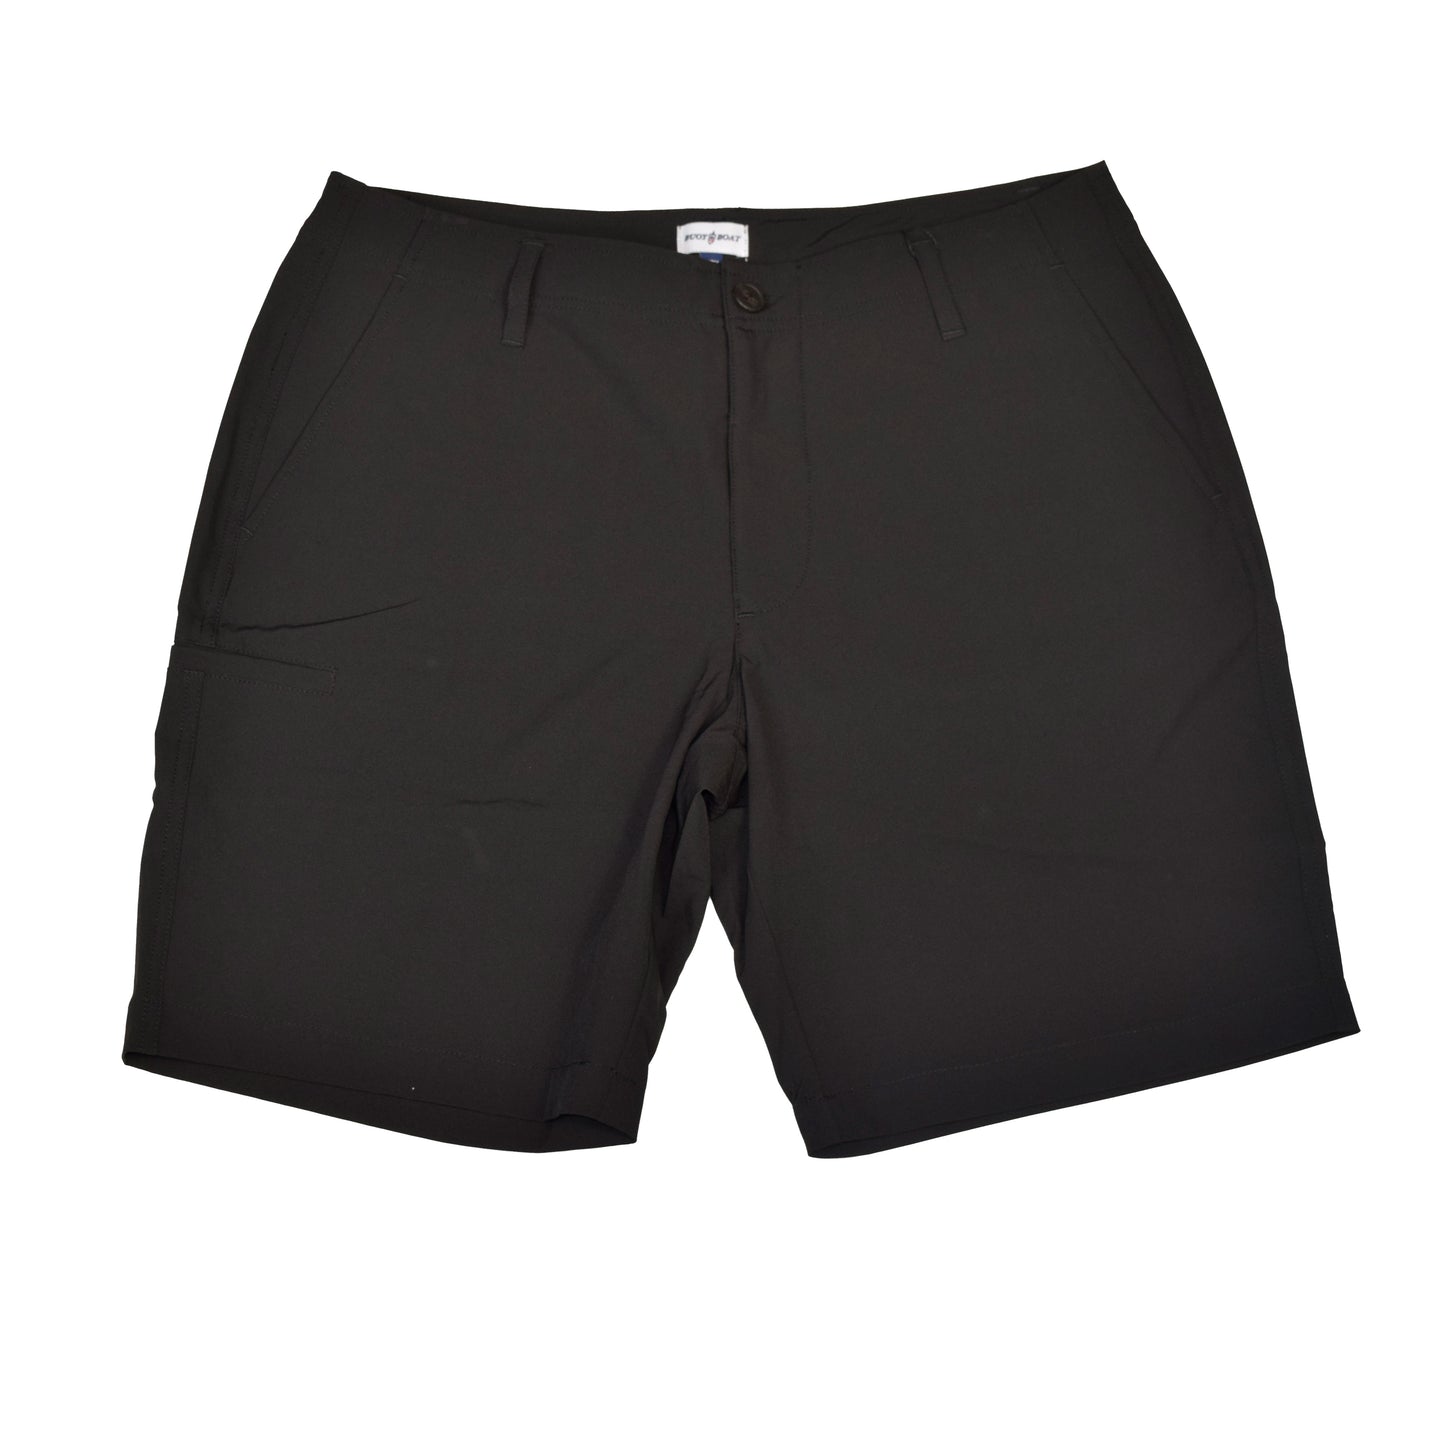 Buoy and Boat Stretch Short - Black